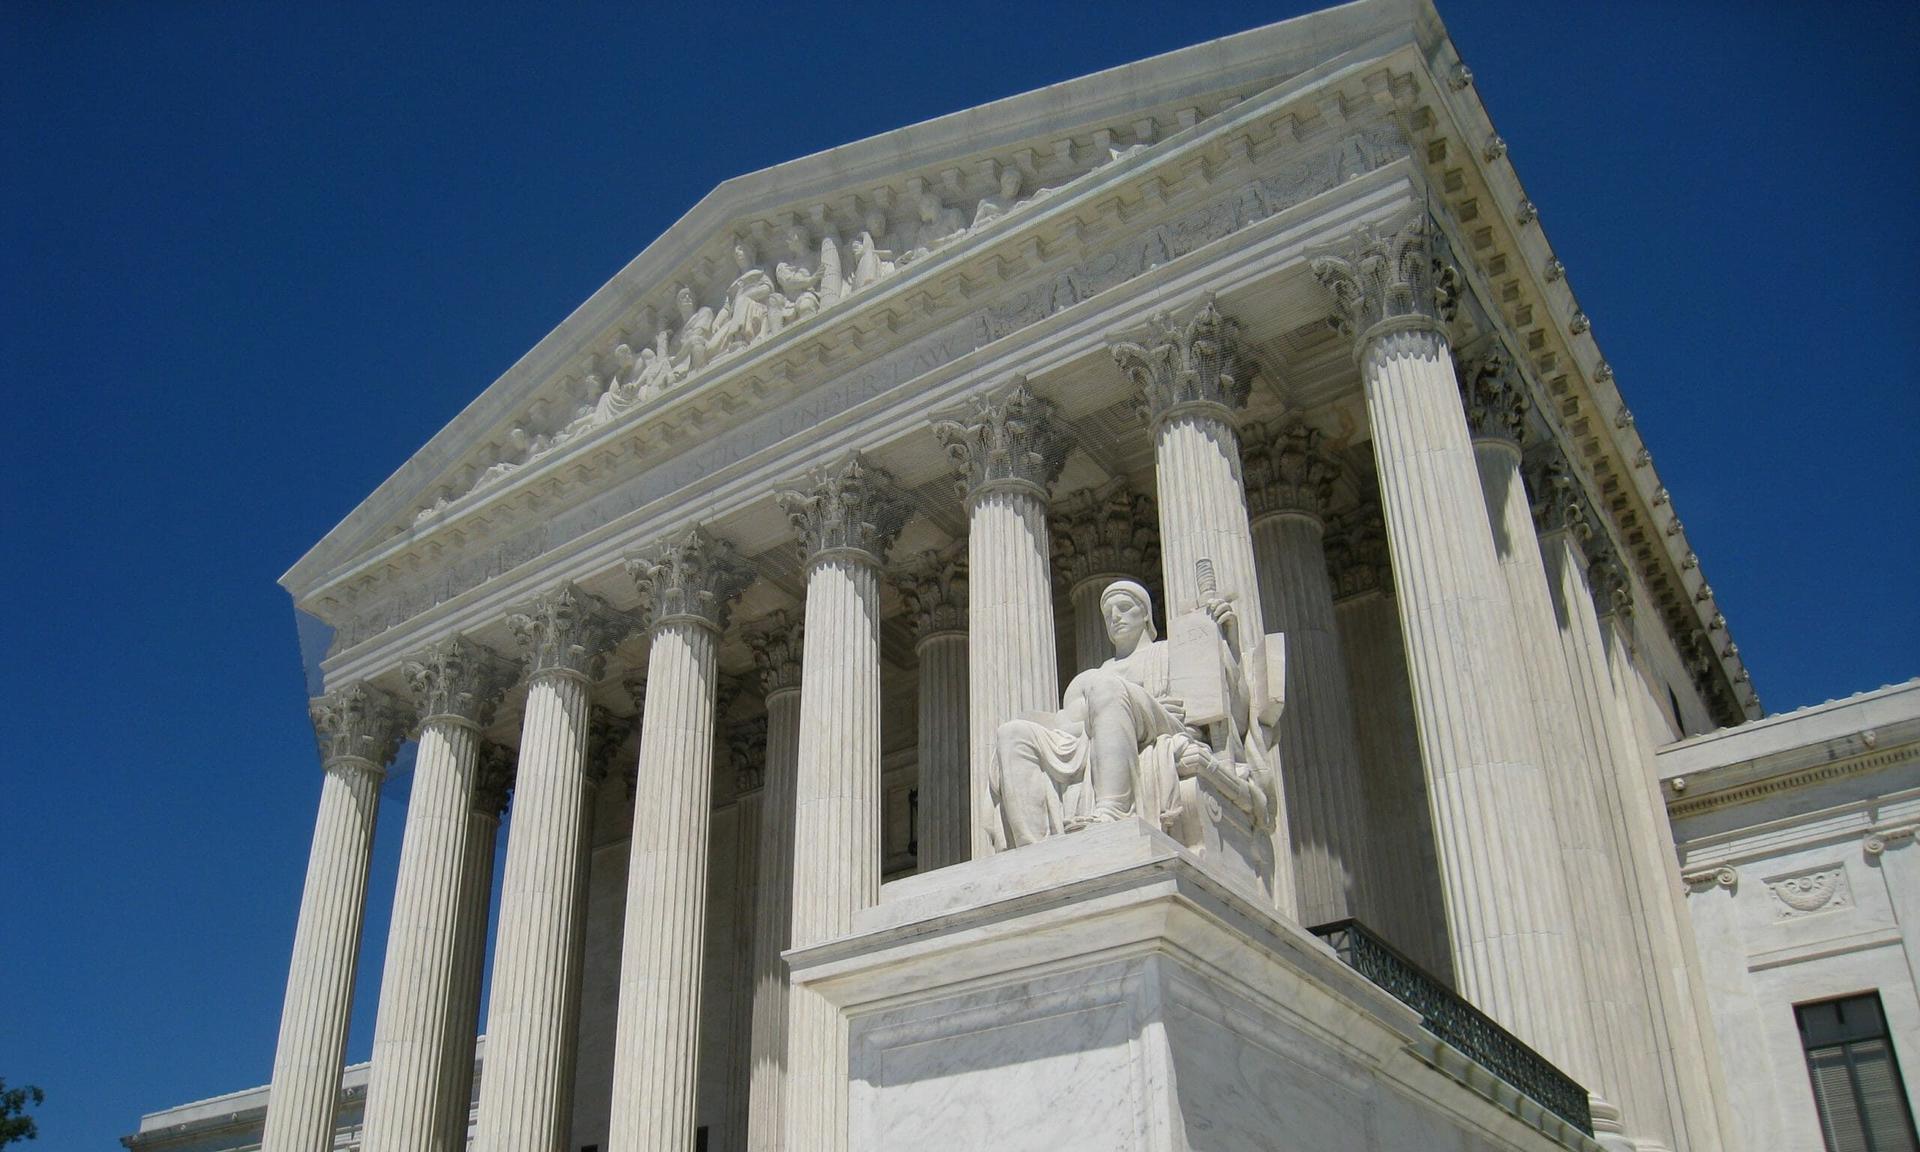 A June 2021 Supreme Court ruling determine breach victims must provide evidence of actual harm to pursue damages from the impacted entity. Despite the ruling, healthcare breach lawsuits are being filed at an exponential  rate. (Daderot, Public domain, via Wikimedia Commons)